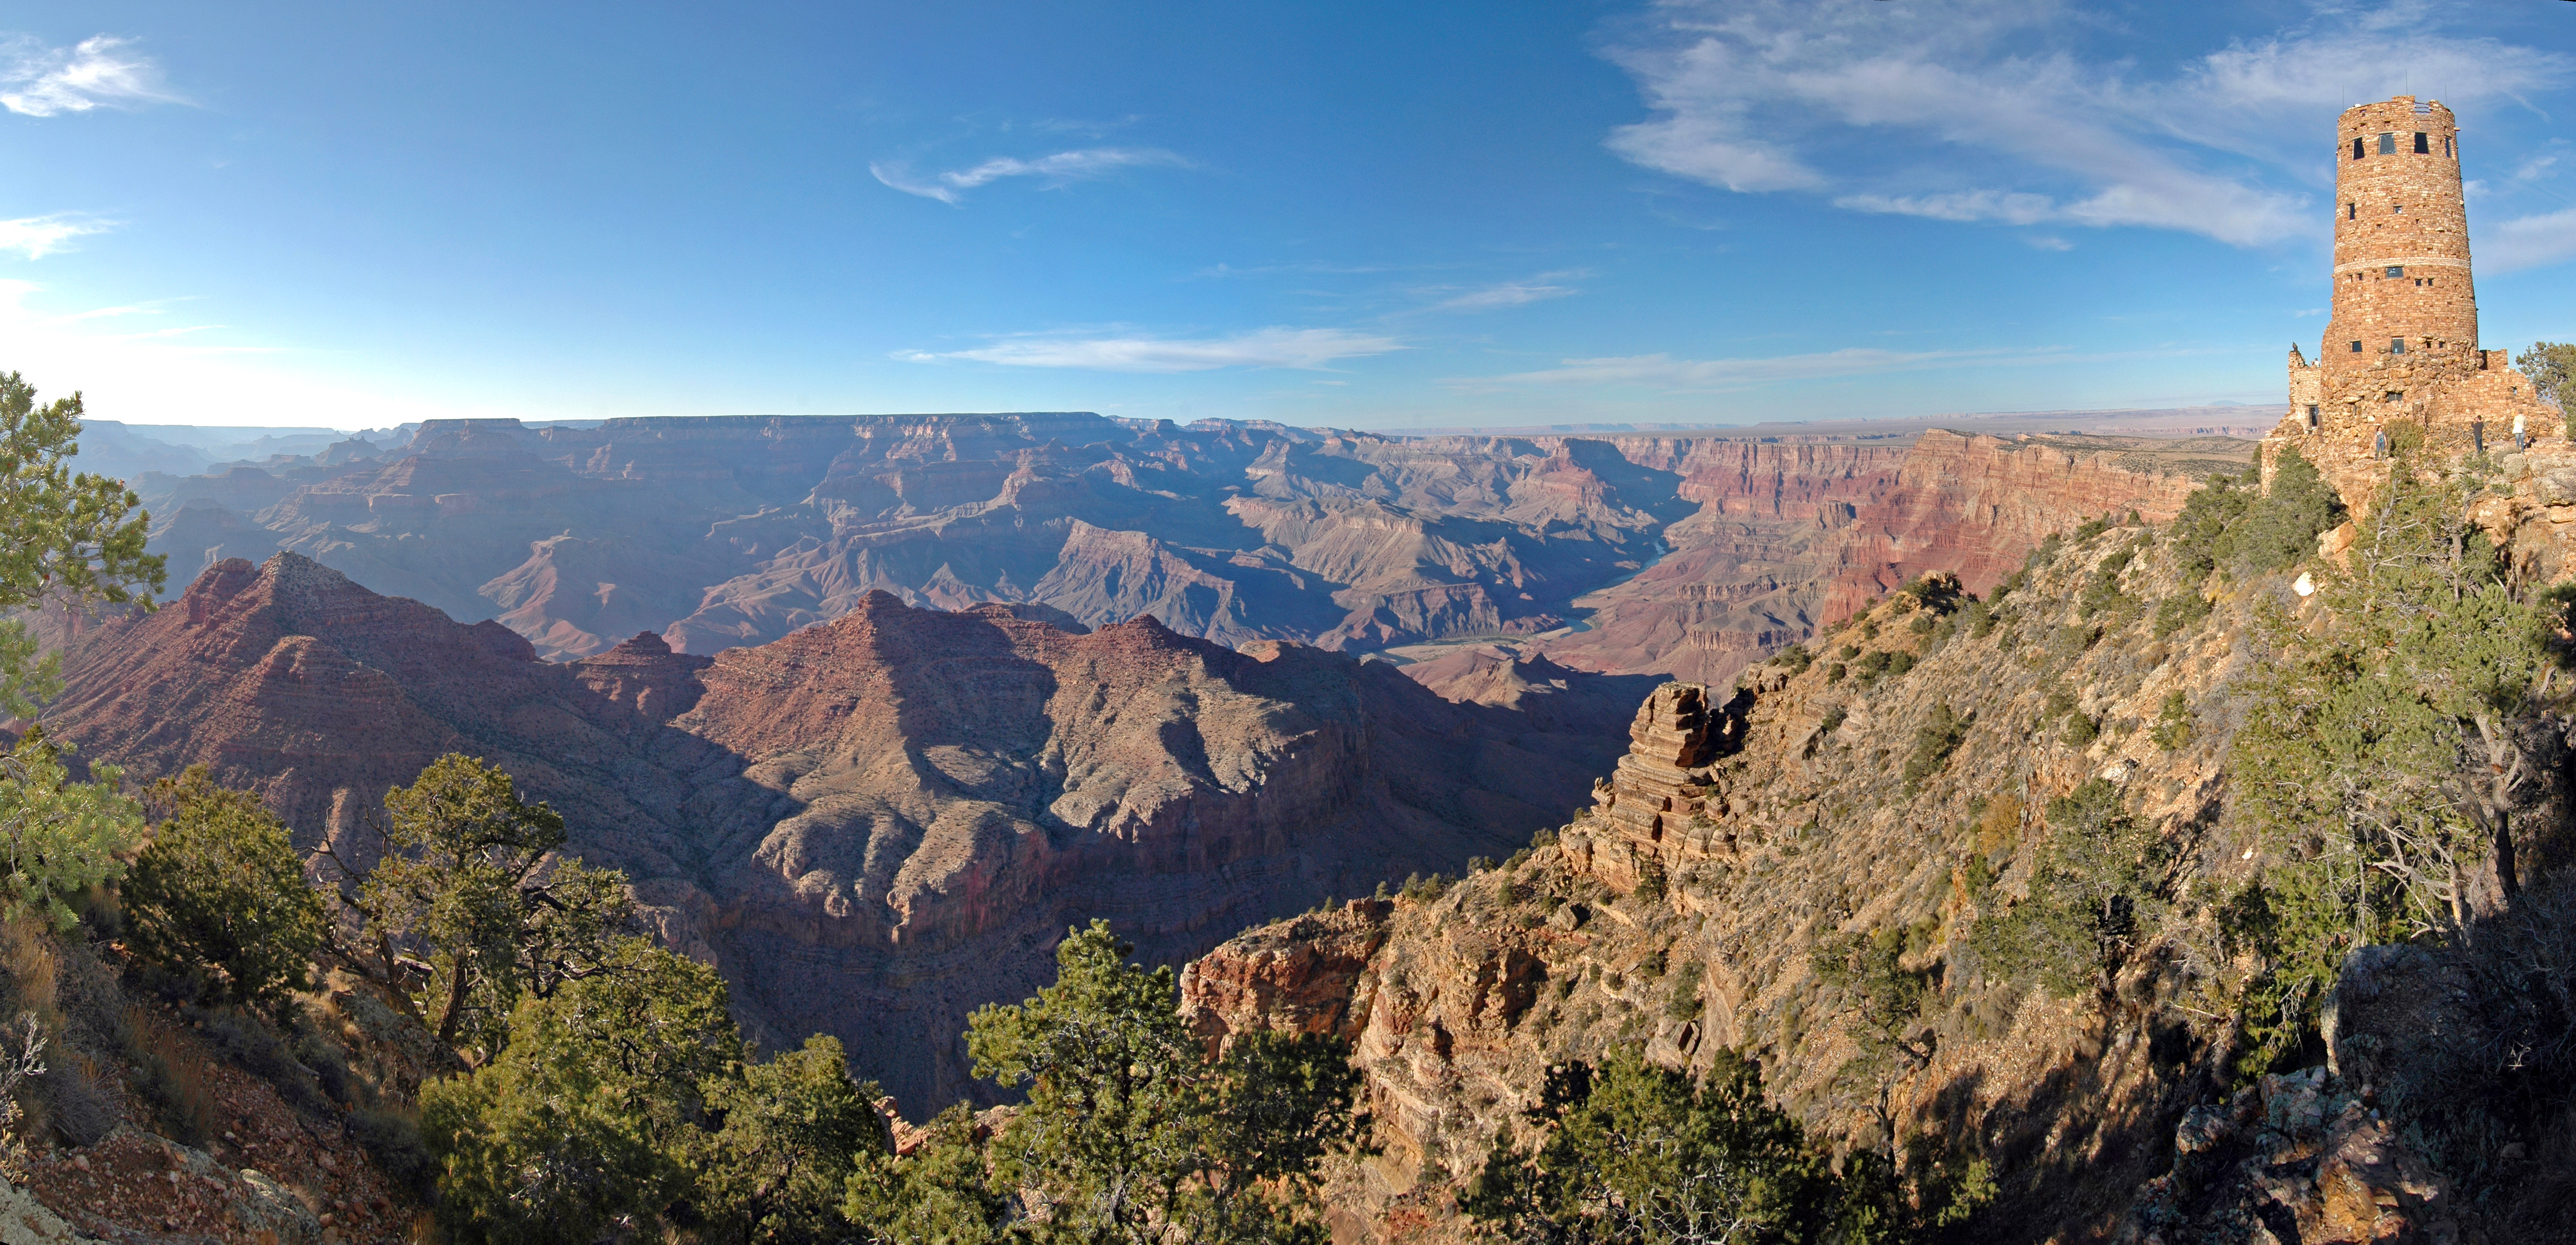 The Desert View Watchtower looms 70 feet into the air over a vast and dramatic view of the canyon.